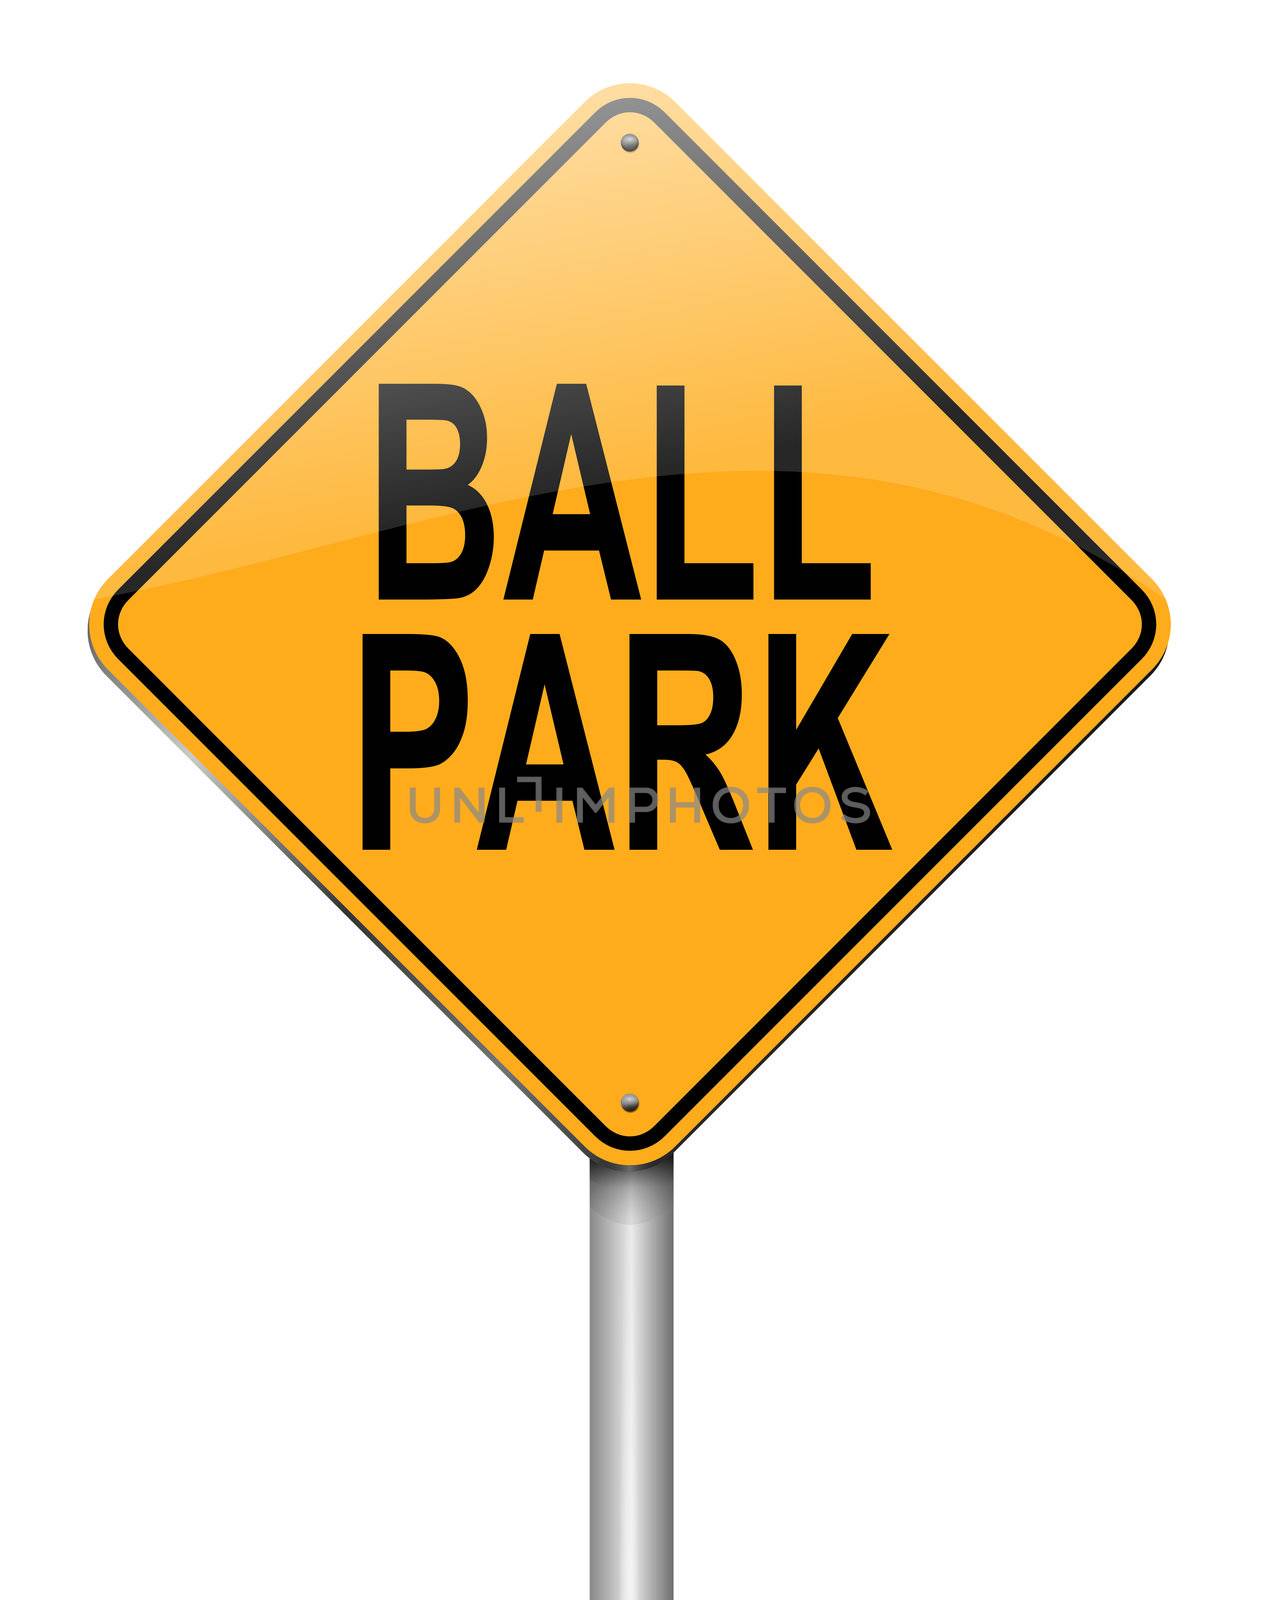 Illustration depicting a roadsign with a ball park concept. White background.